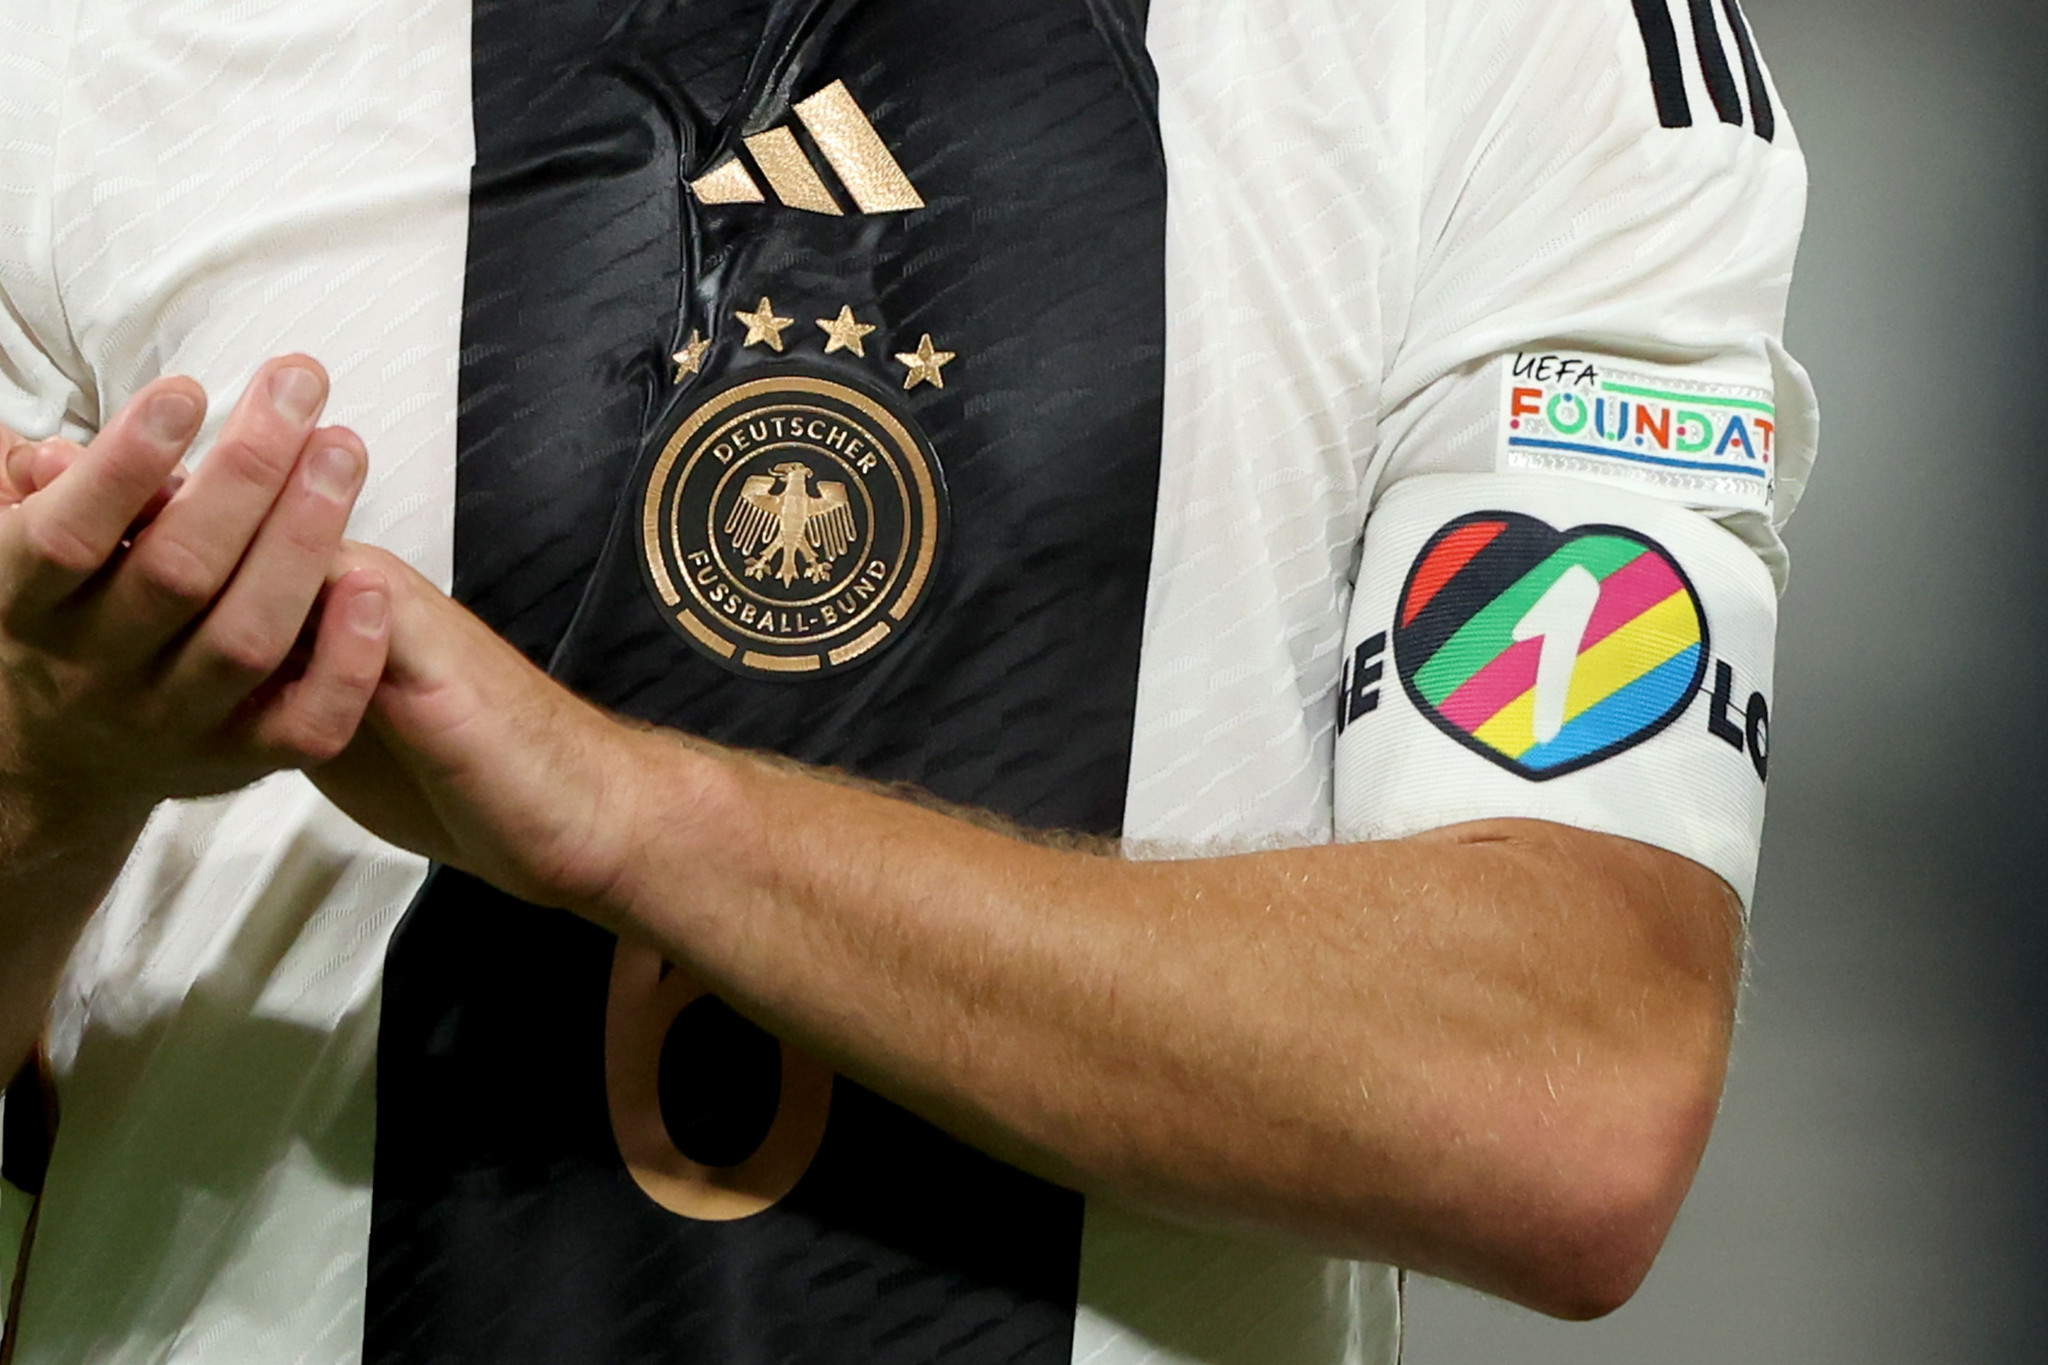 Germany's captain is poised to wear a 